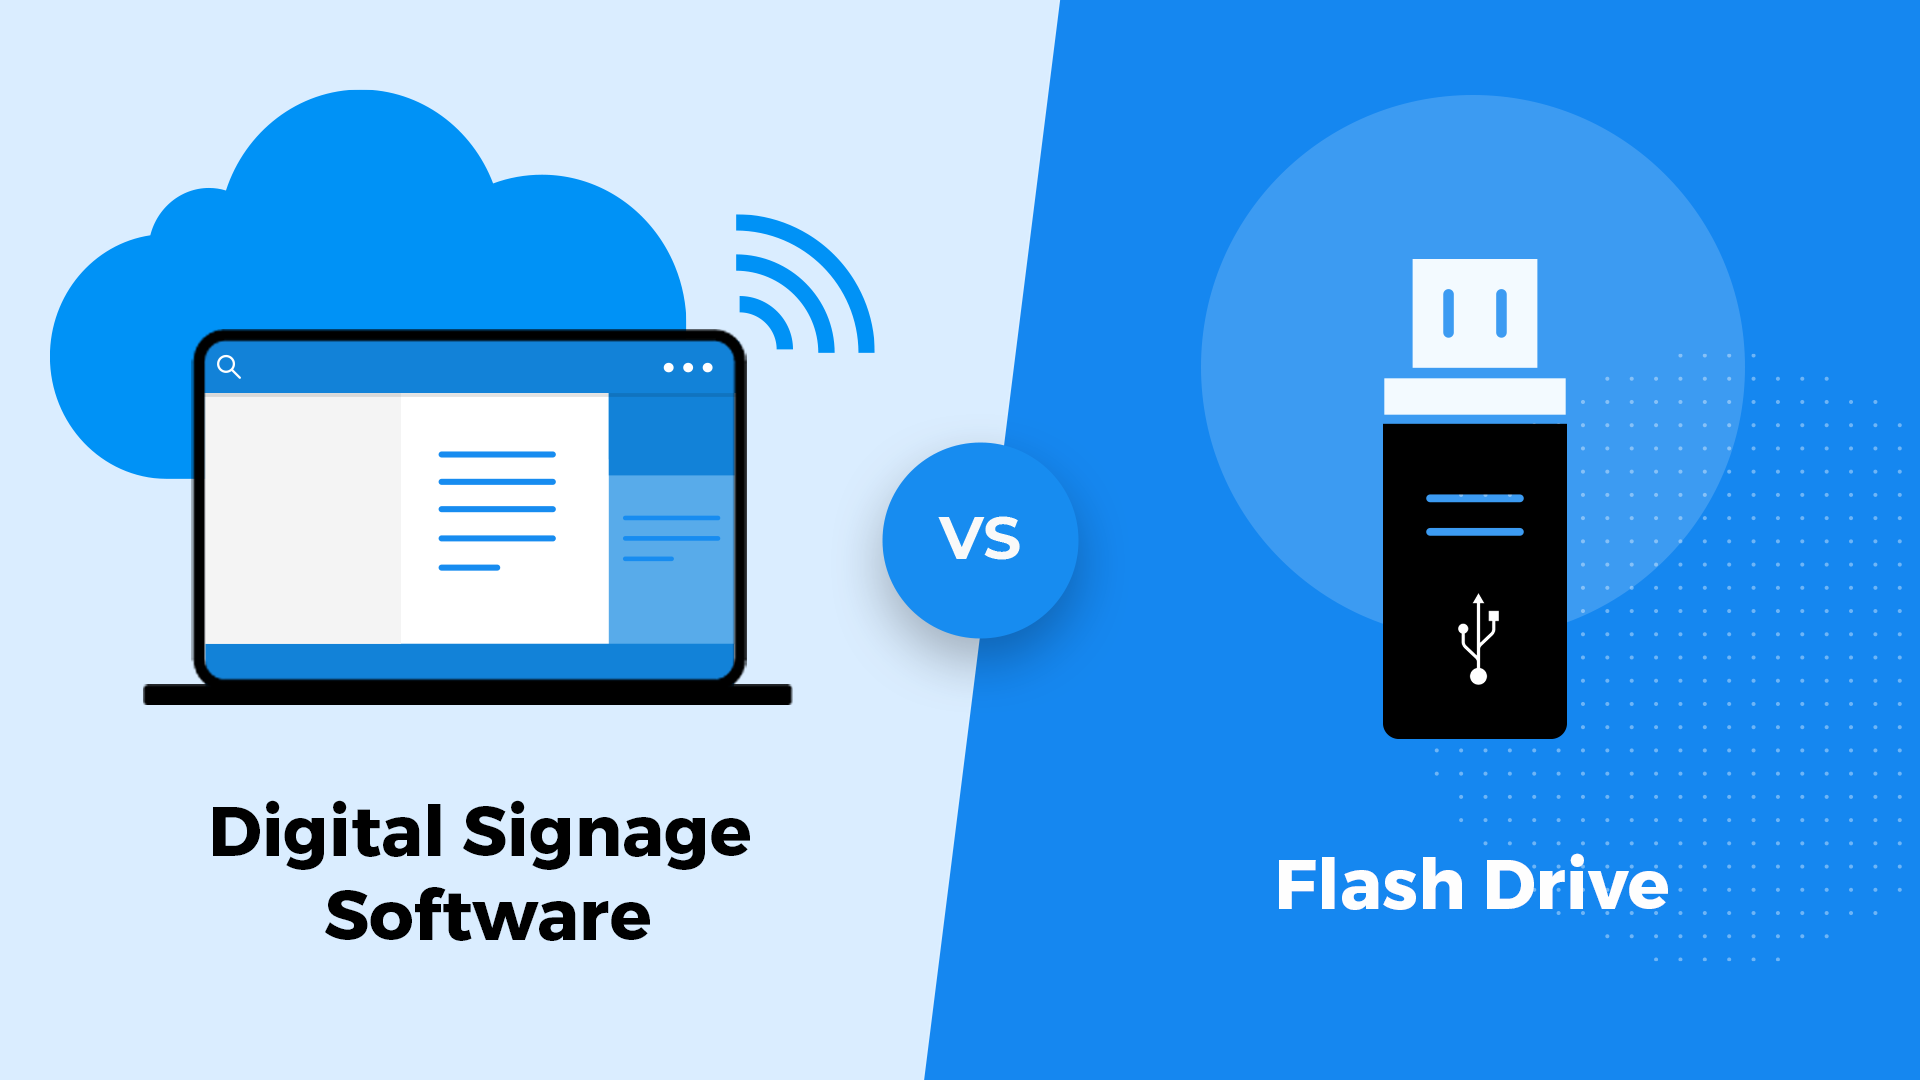 Video - The differences between digital signage software and a USB stick